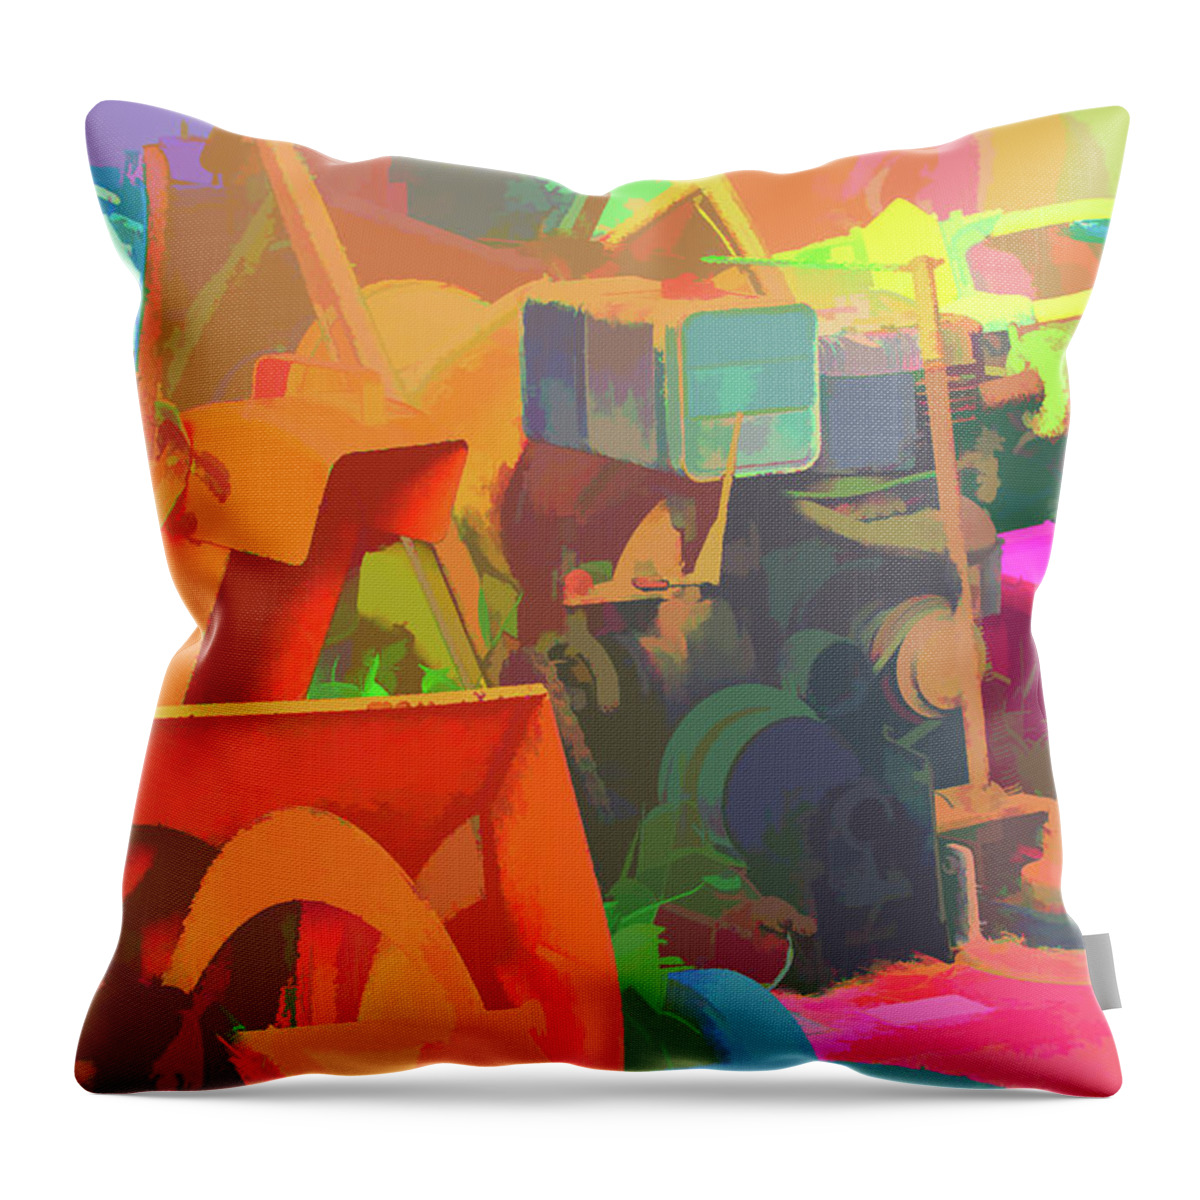 Old Machinery Throw Pillow featuring the digital art Junk Jumble by Steve Ladner